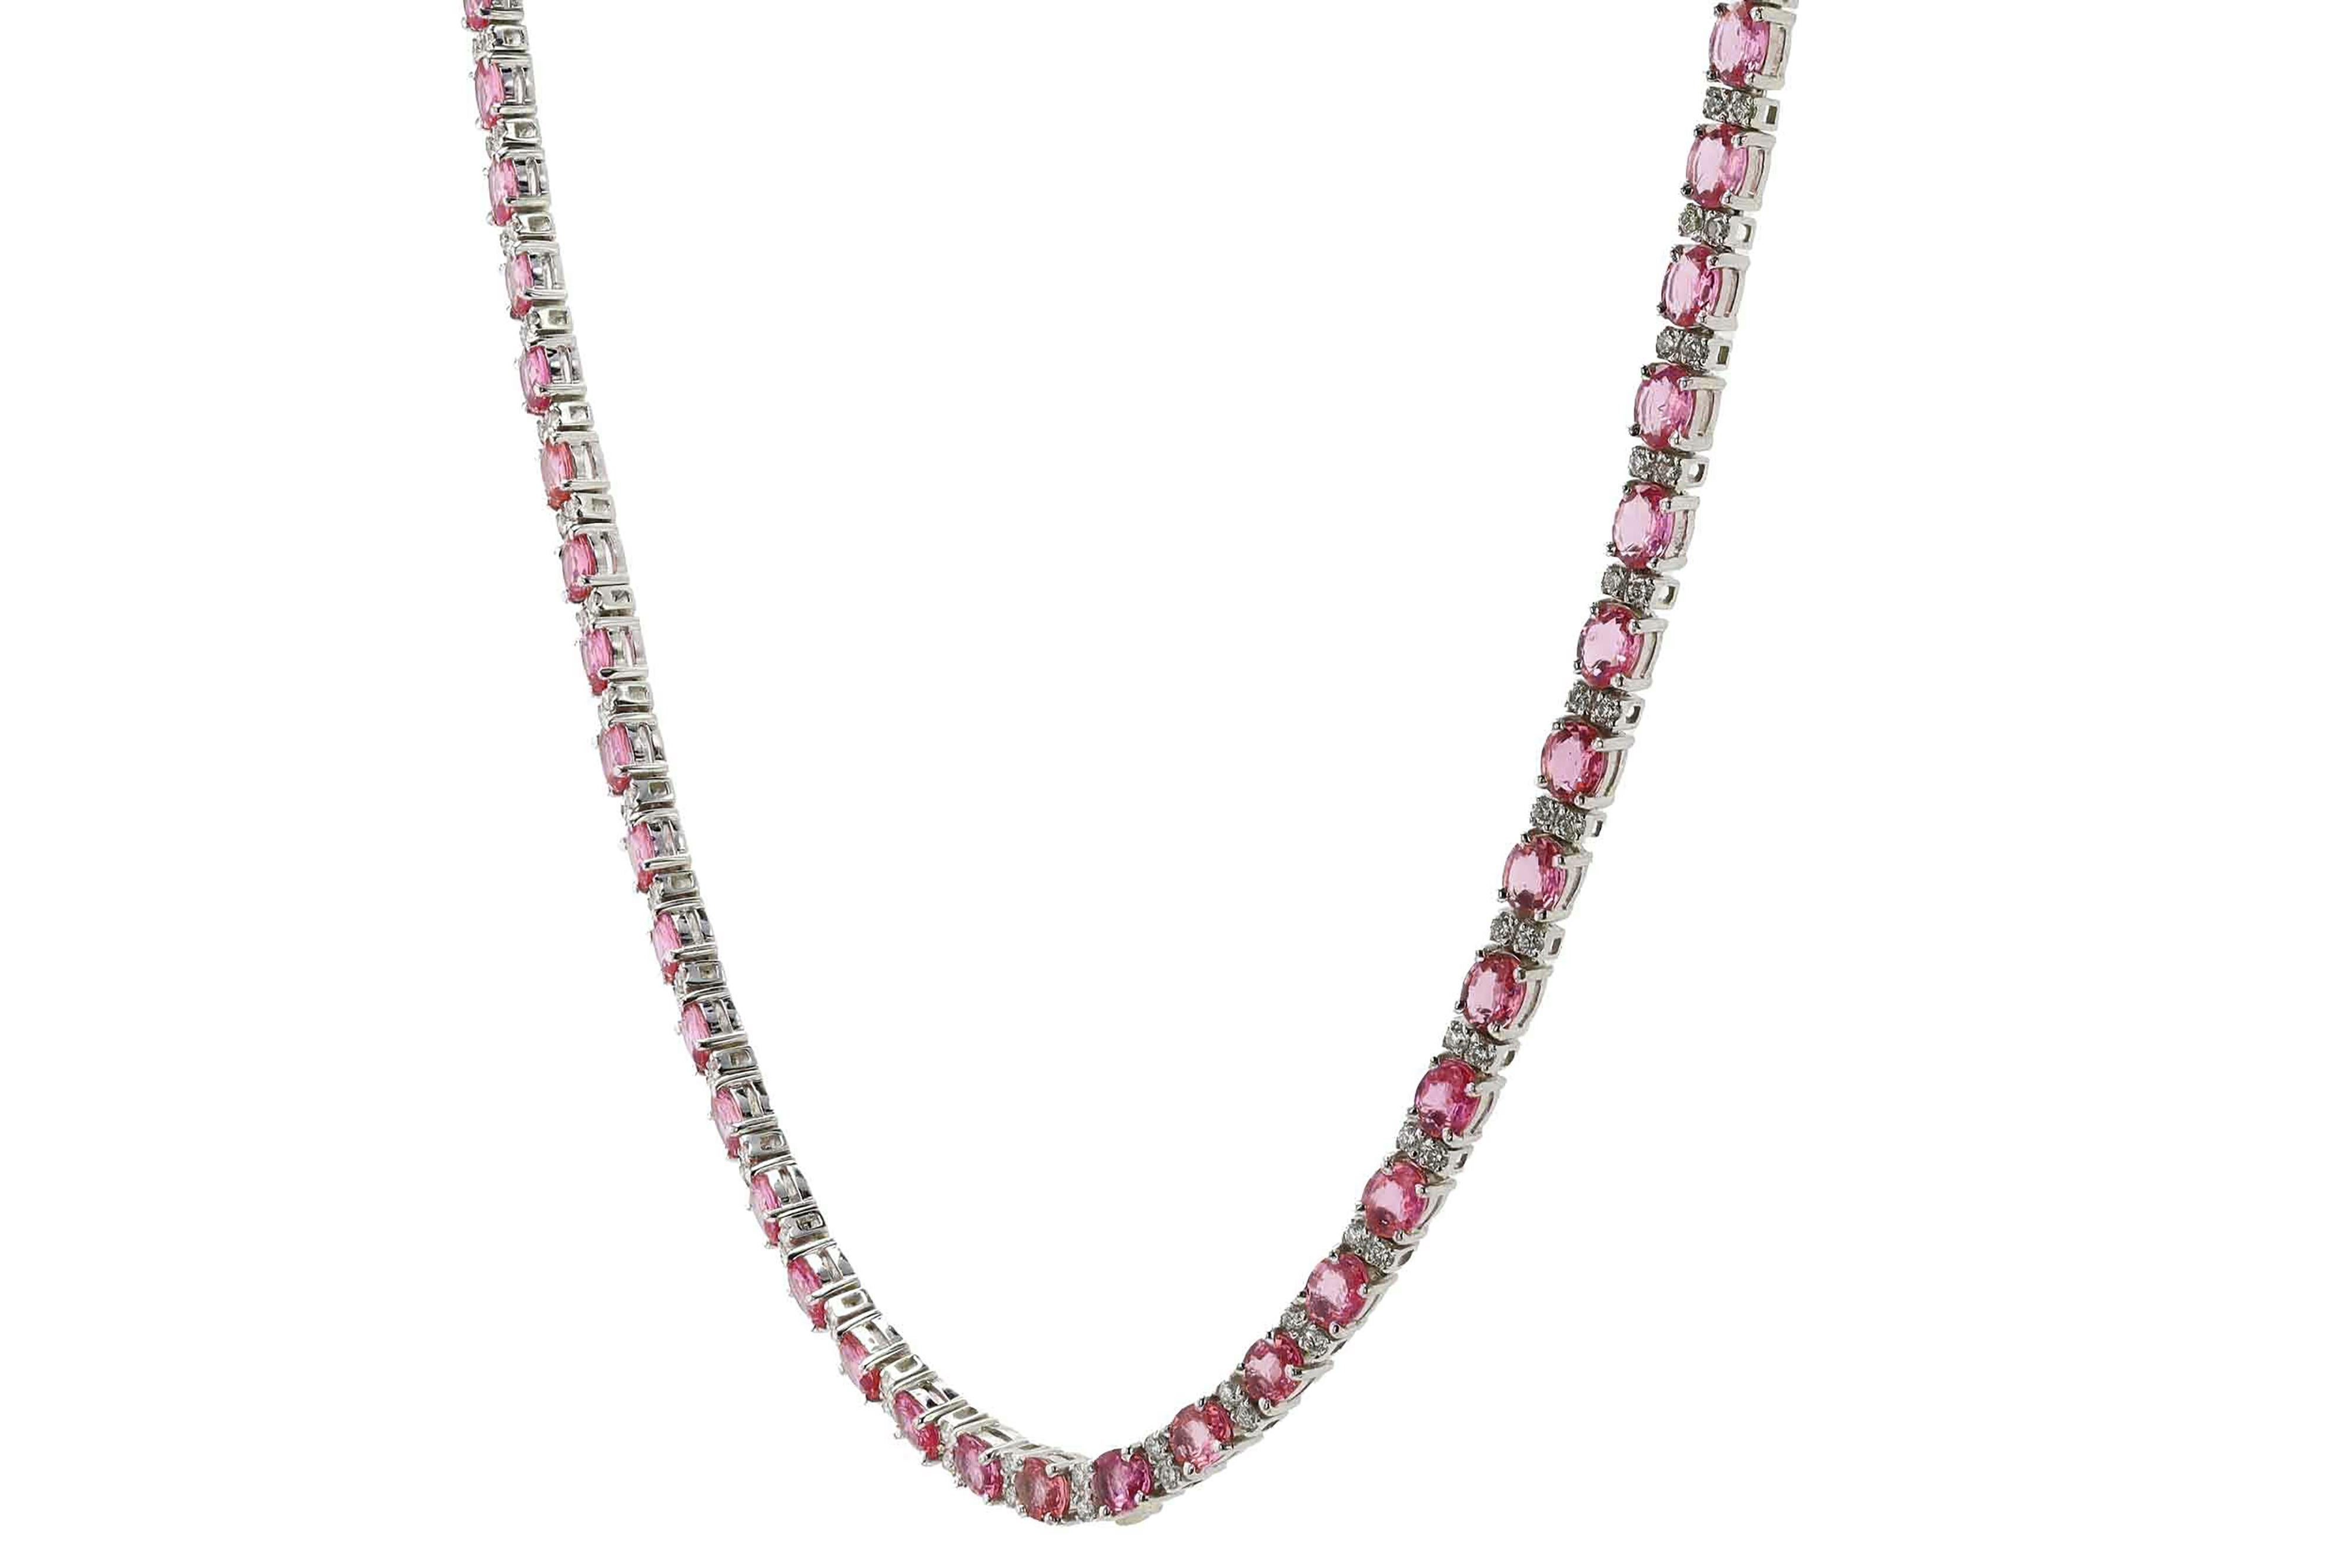 Oval Cut Estate 23 Carats Pink Sapphire and Diamond Riviera Necklace